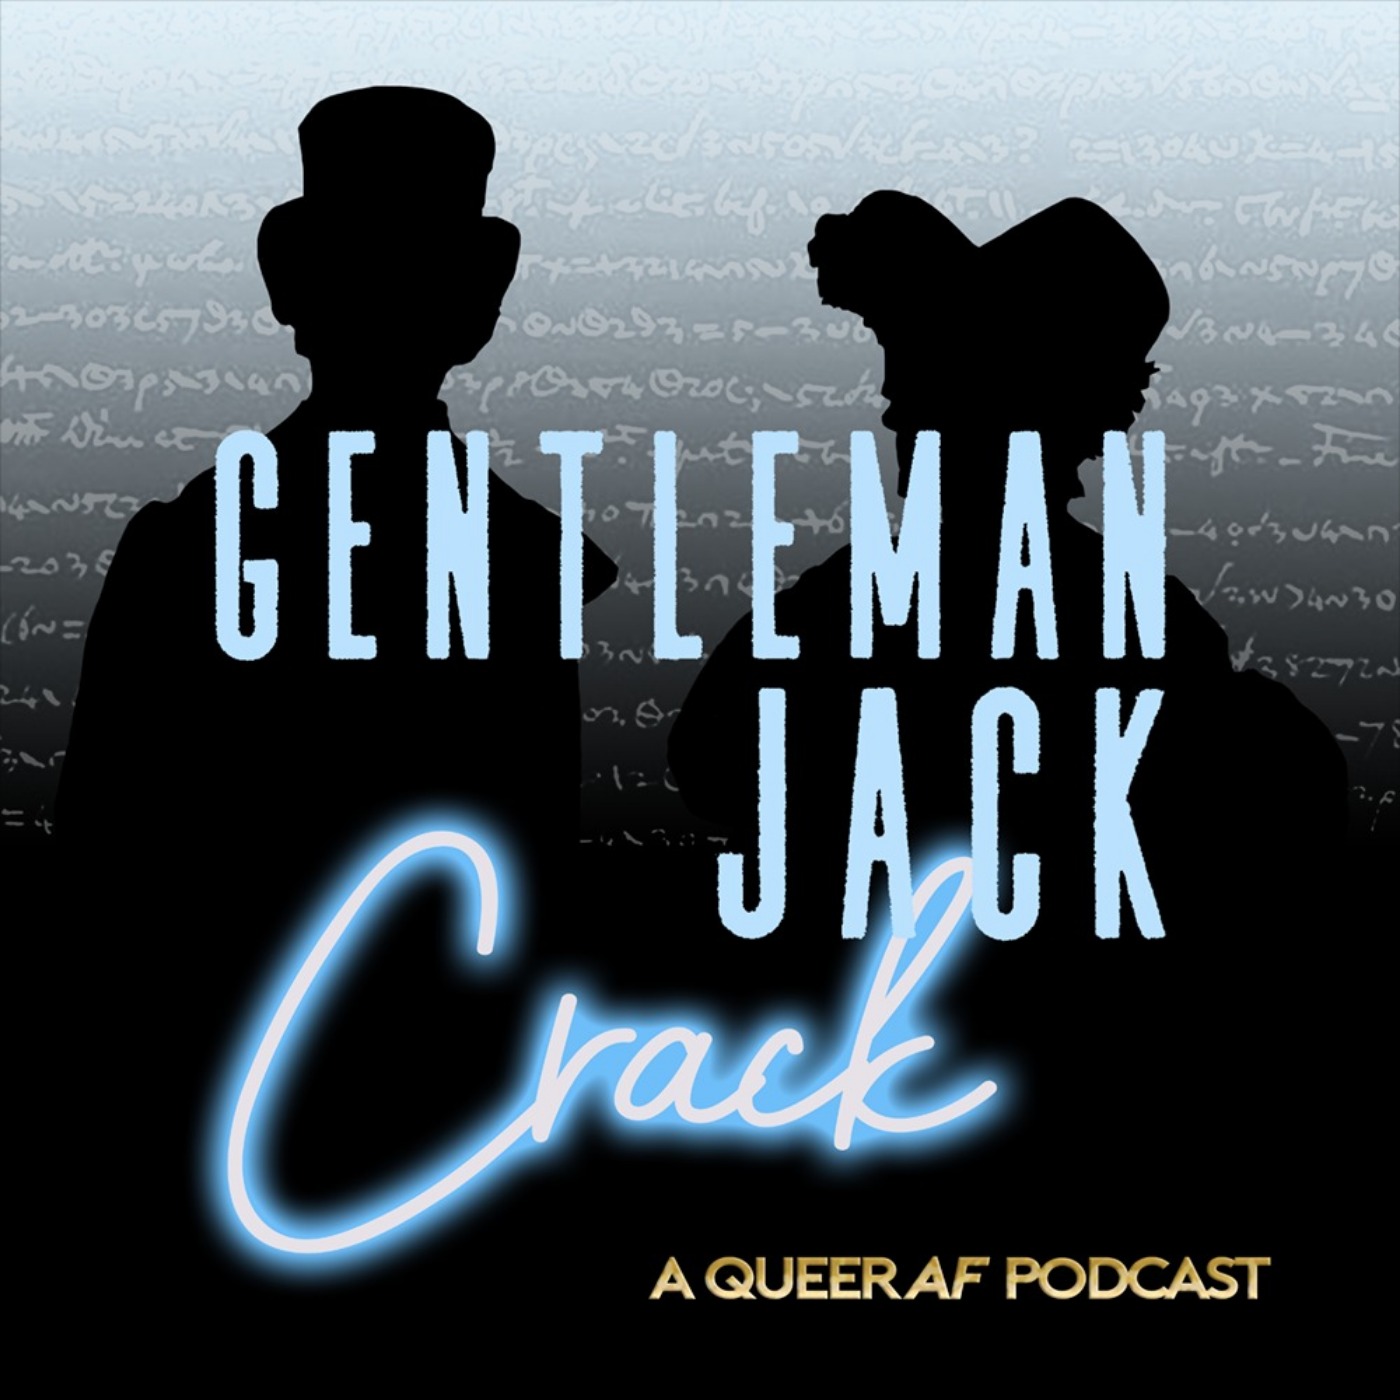 Gentleman Jack Crack - “Most Women are Dull and Stupid”